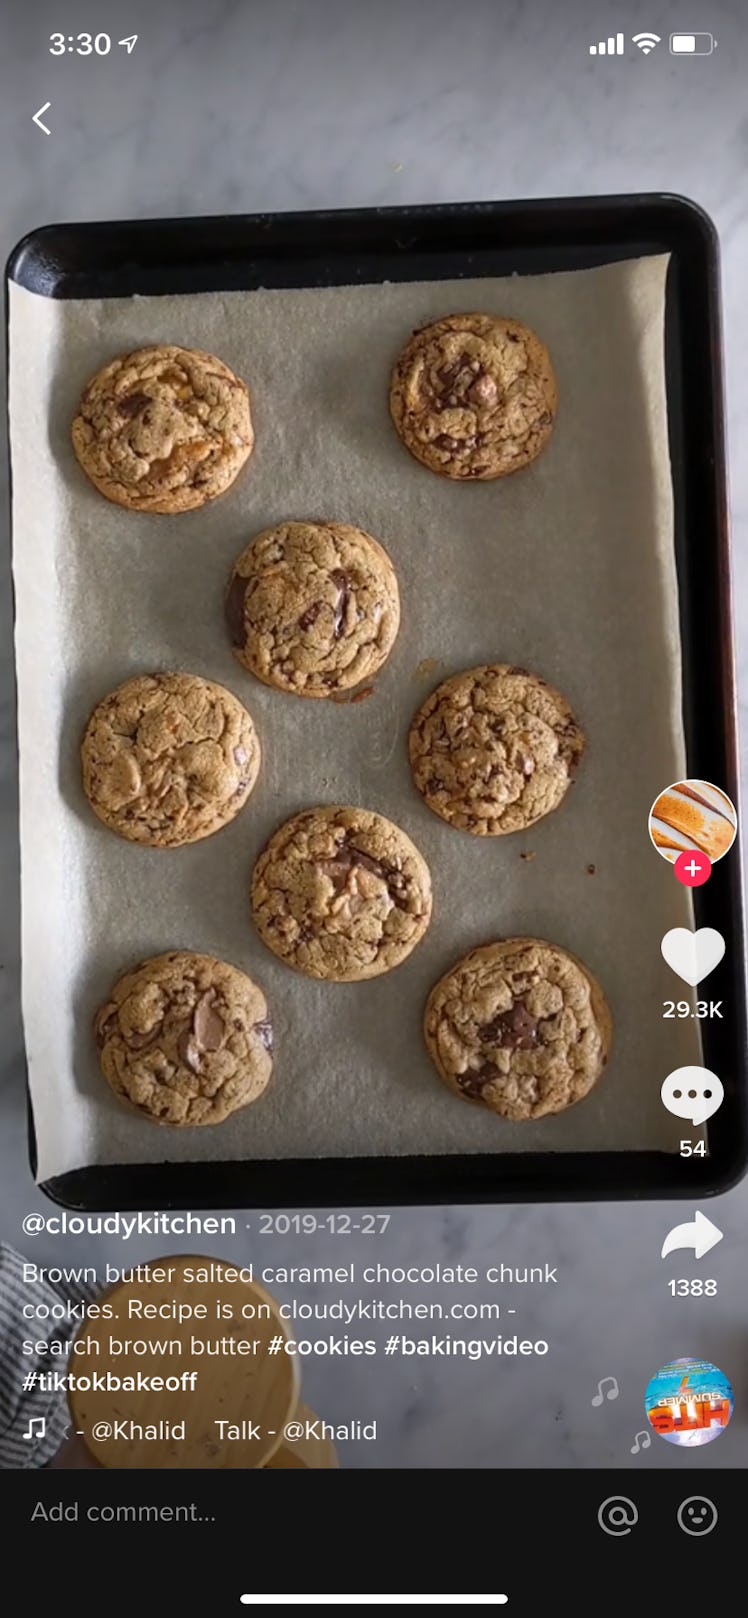 Brown butter salted caramel chocolate chunk cookies sit on a pan during a TikTok video.